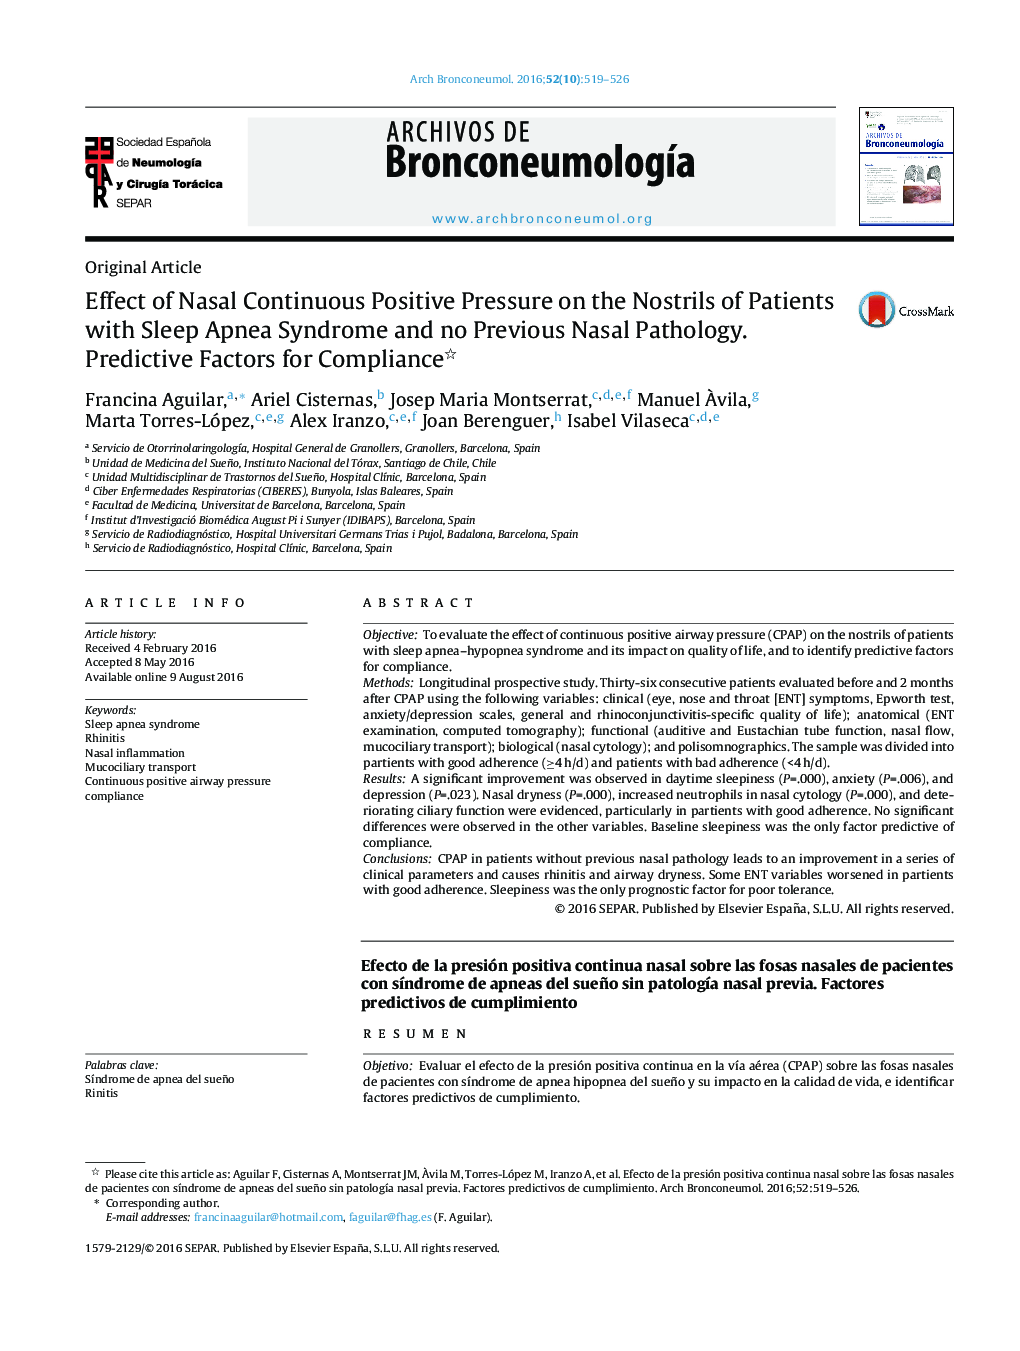 Effect of Nasal Continuous Positive Pressure on the Nostrils of Patients with Sleep Apnea Syndrome and no Previous Nasal Pathology. Predictive Factors for Compliance 